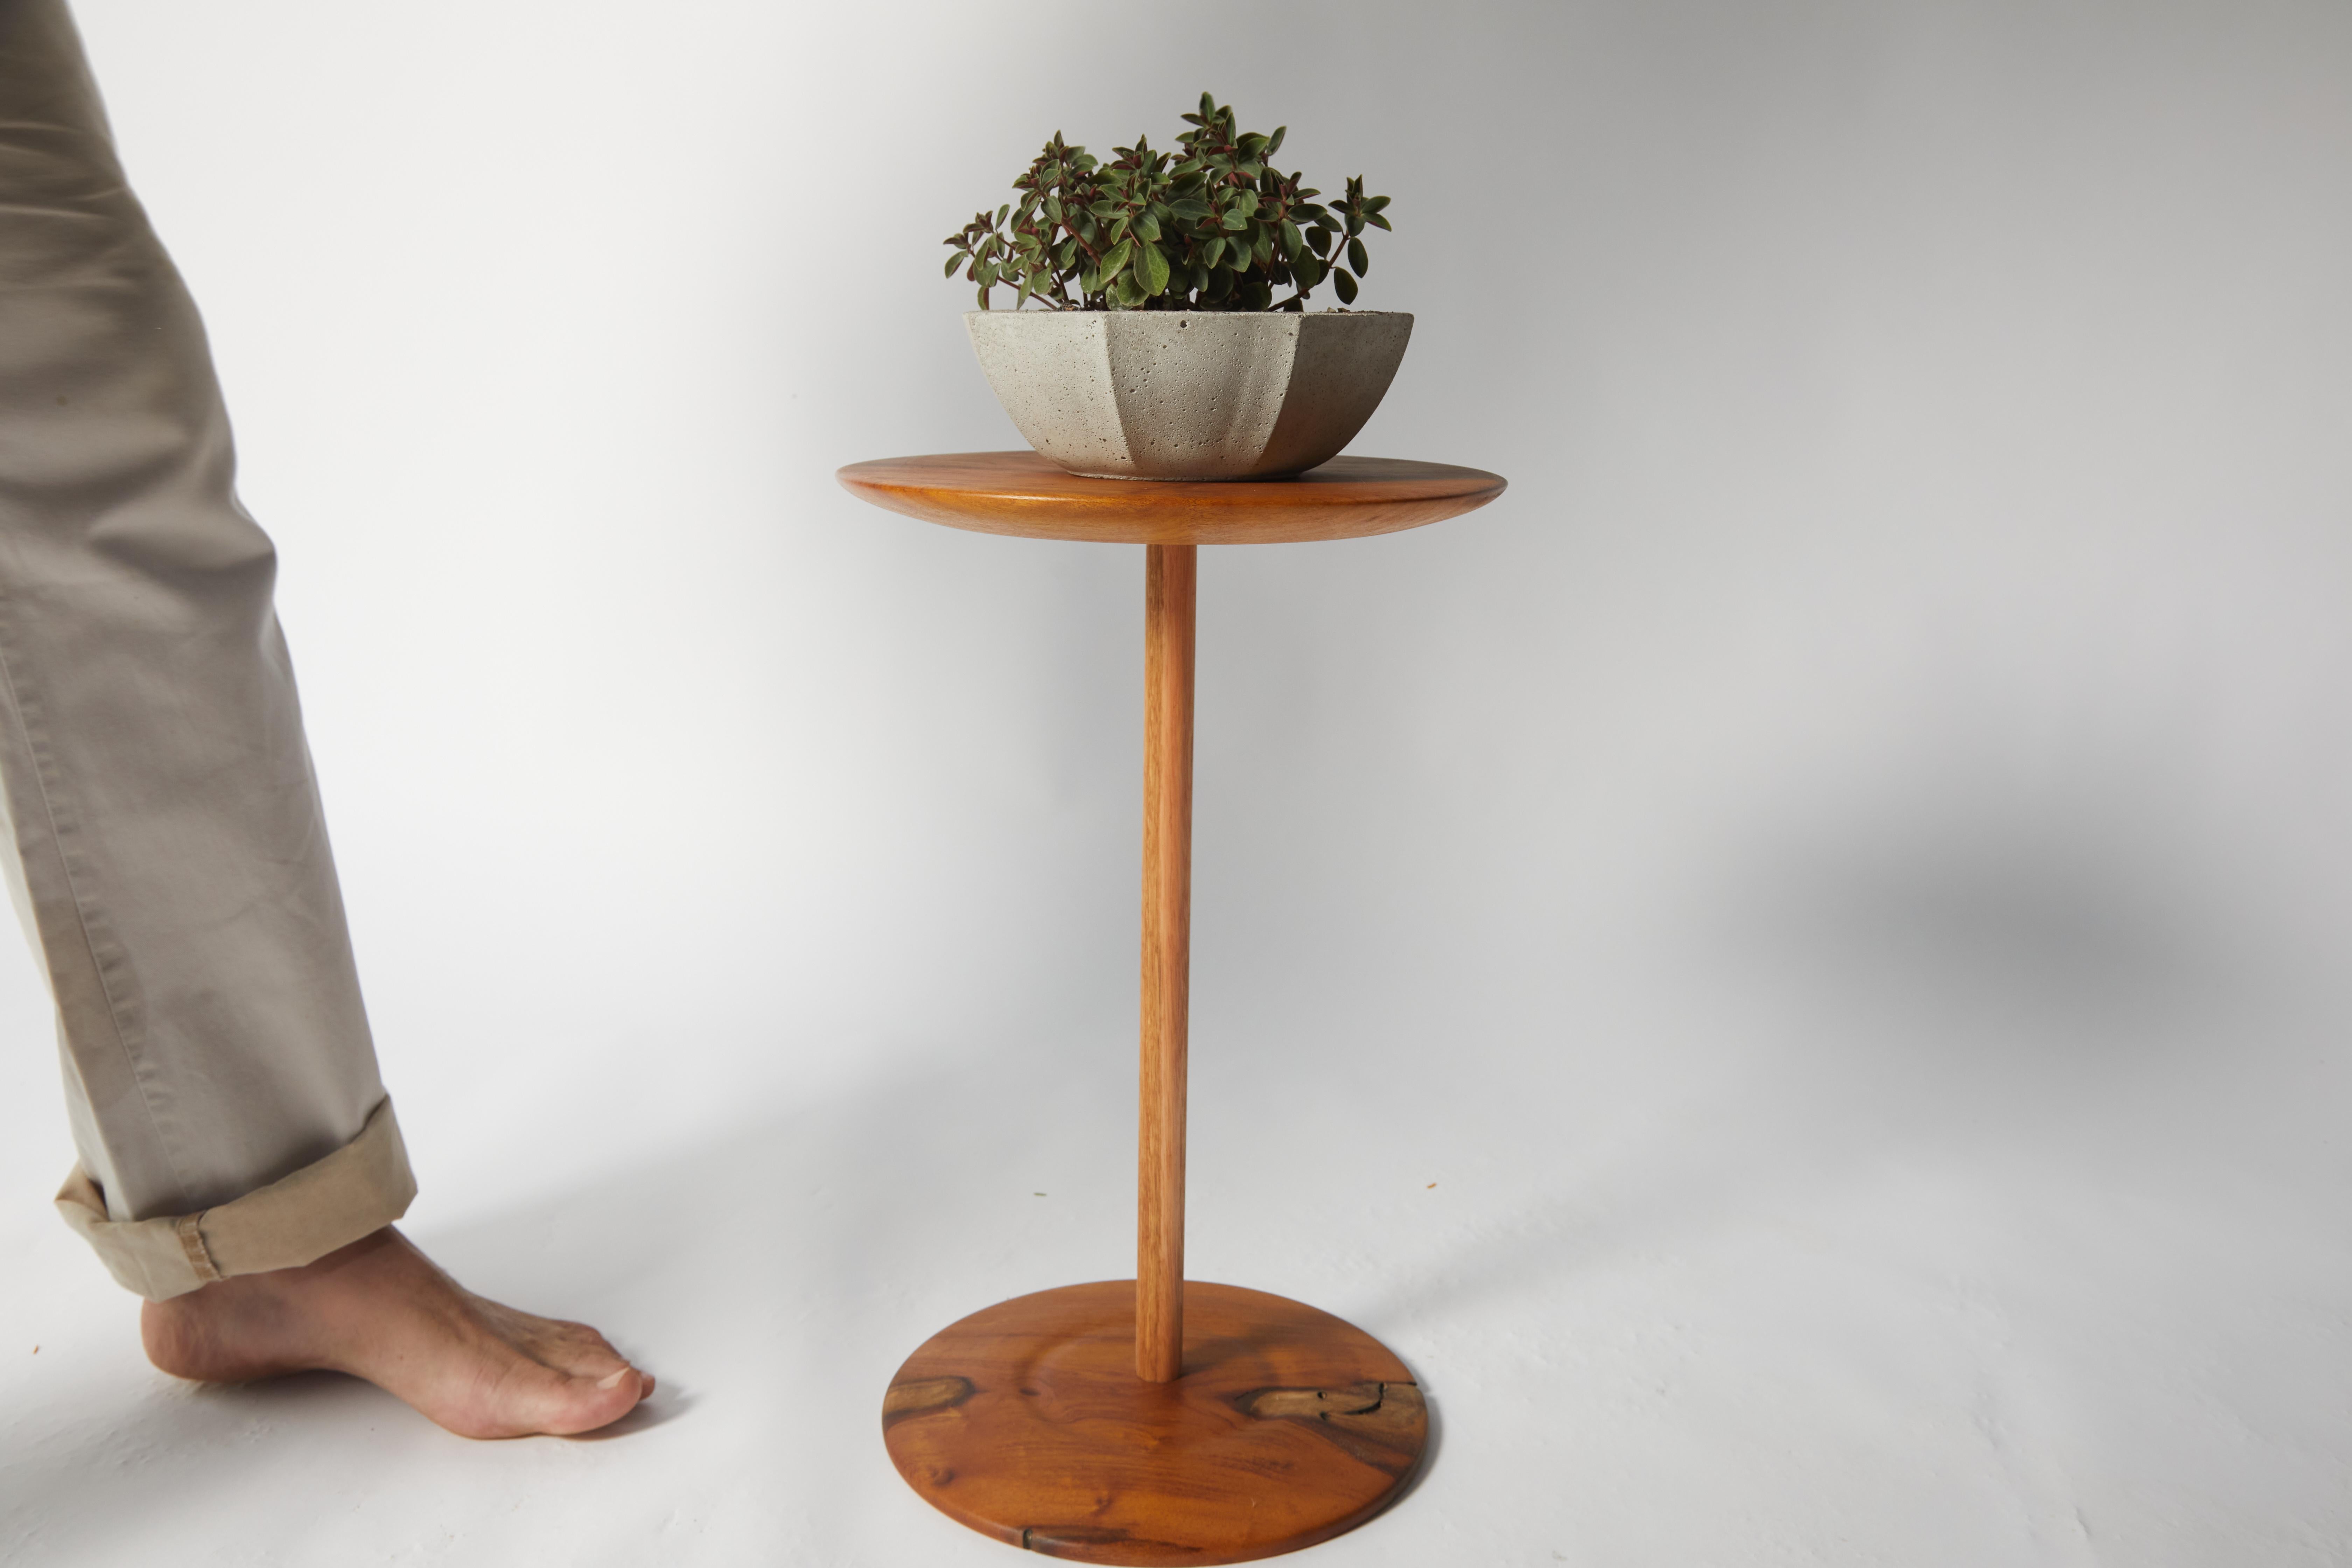 'Cerchi' side table, made manually in the wood turning process. Ideal piece for support next to sofas, armchair or even functioning as a nightstand.

The table is made with traditional joinery techniques, without nails or screws, only with fittings.